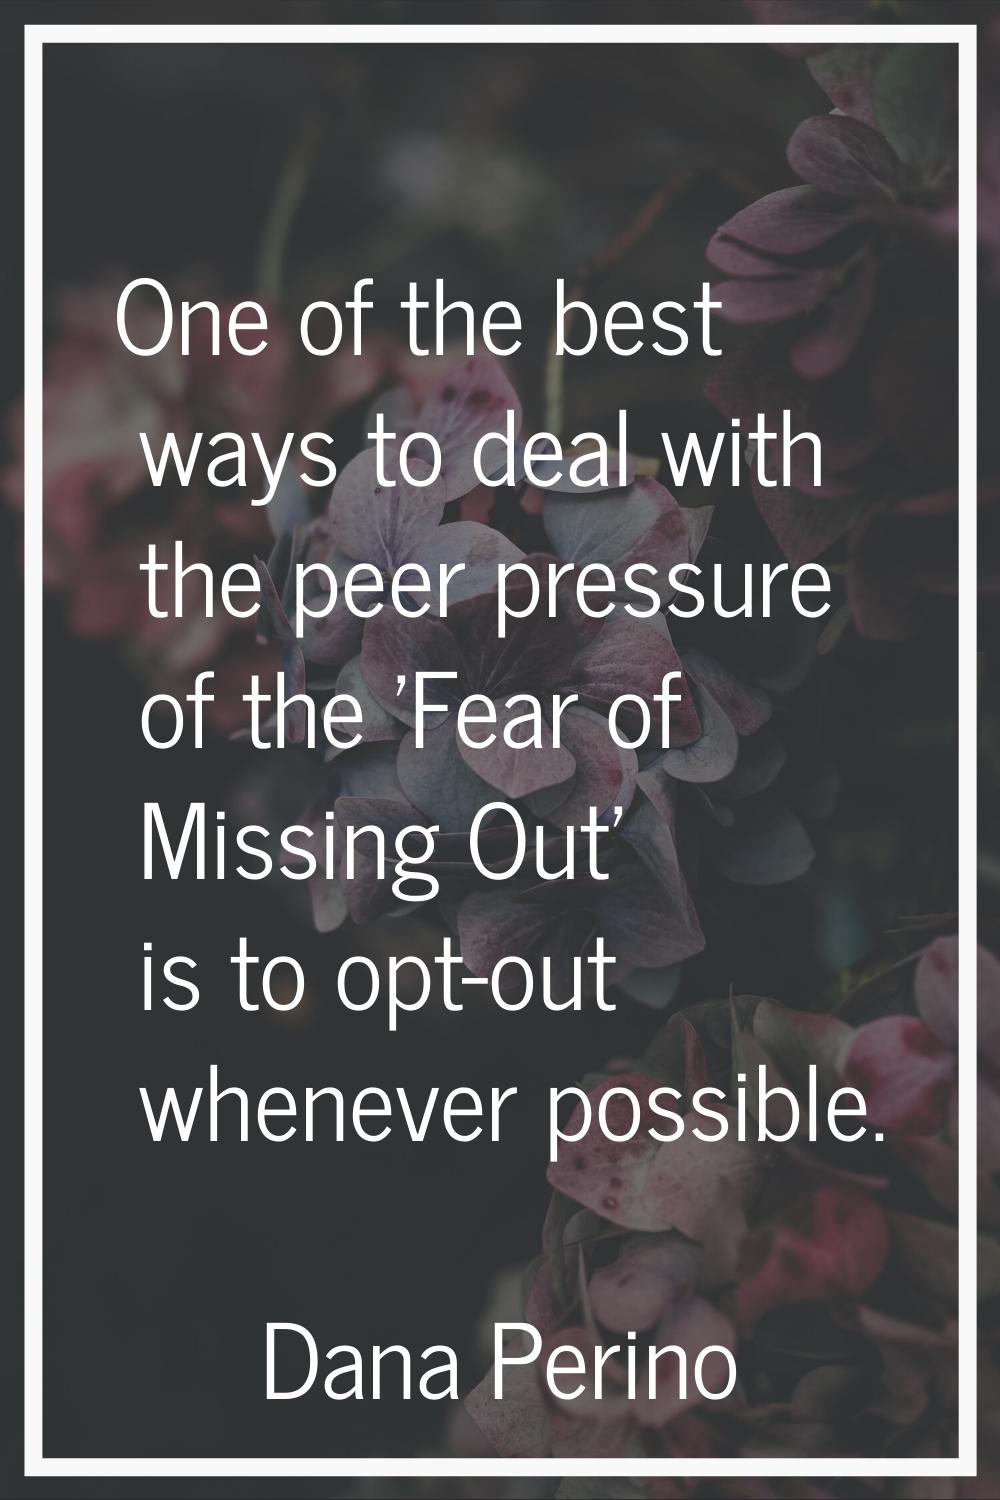 One of the best ways to deal with the peer pressure of the 'Fear of Missing Out' is to opt-out when